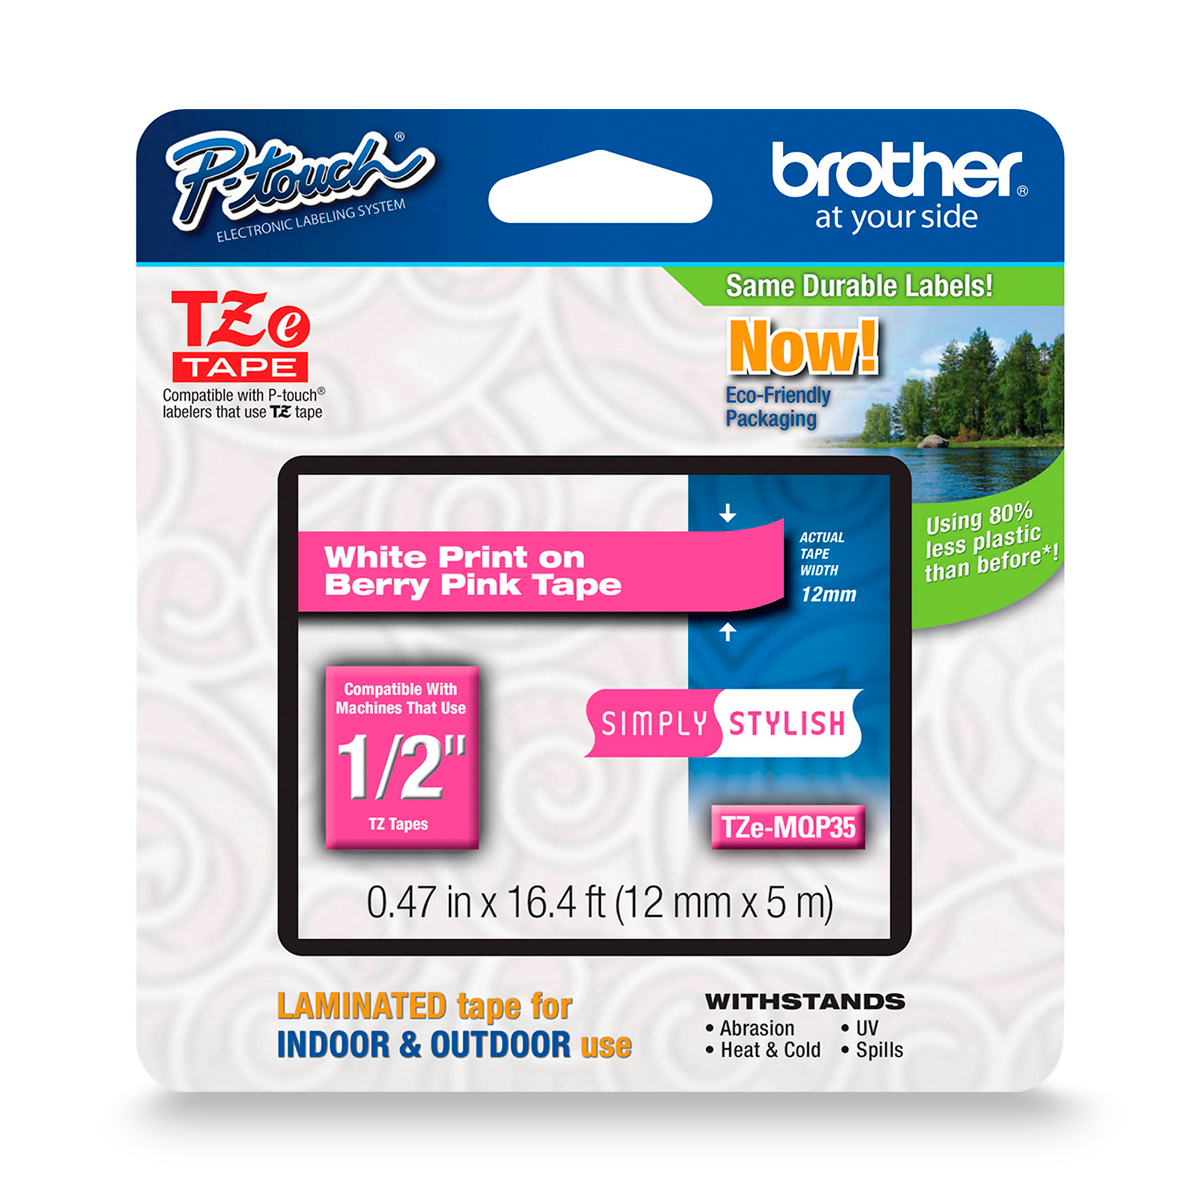 CINTA BROTHER ROSA/LETRA BLANCA (12MM,2PACK)